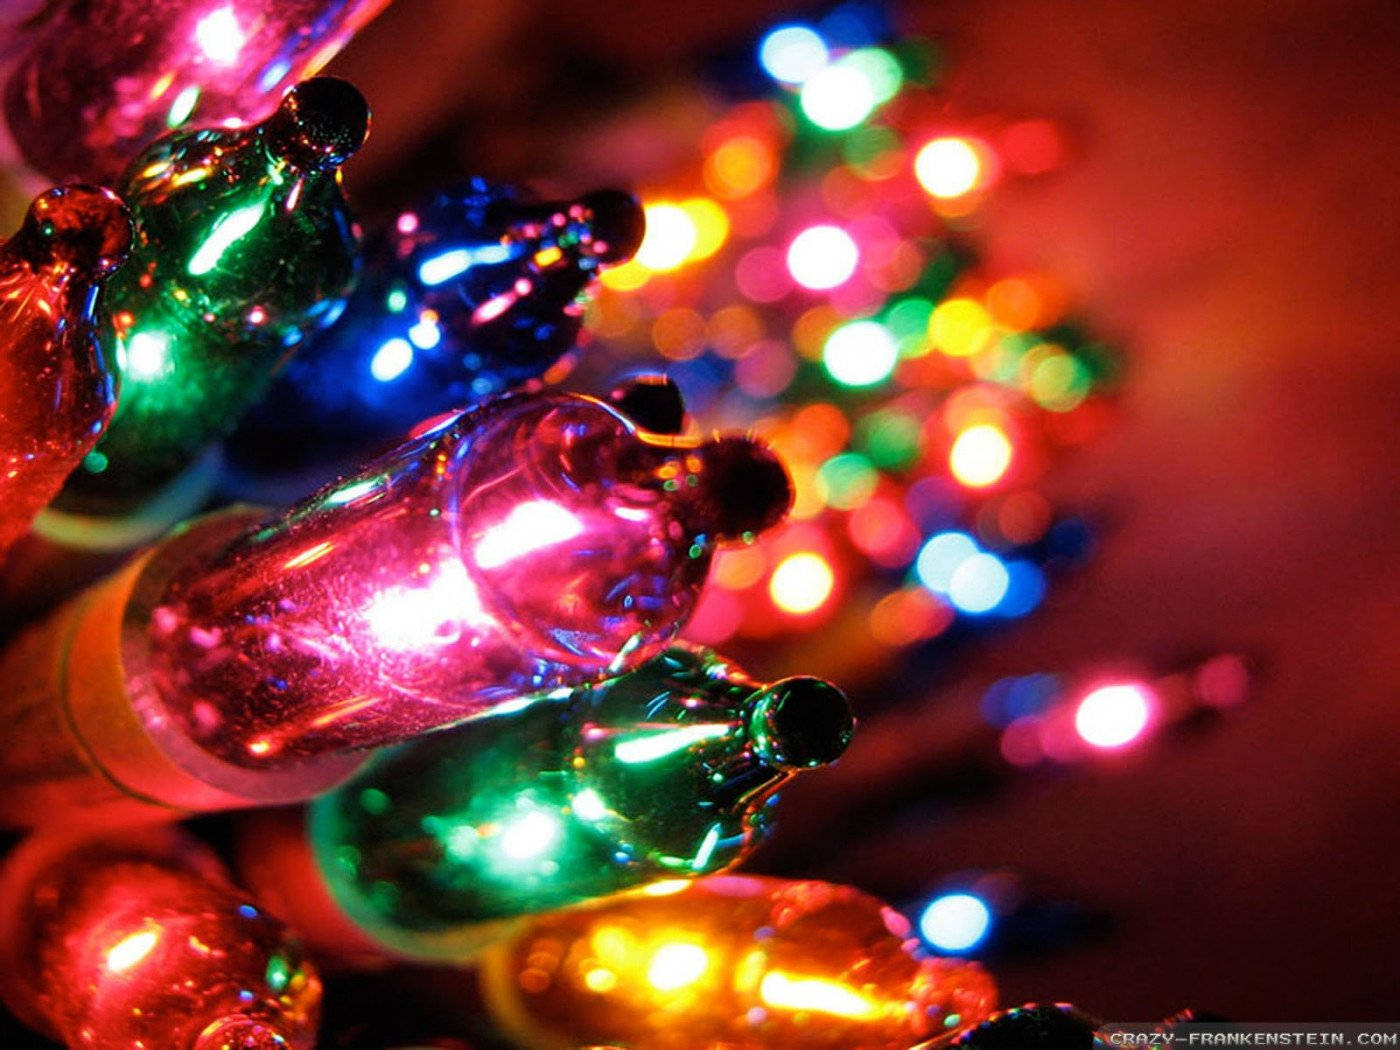 Brighten up your home for the holidays with these twinkling Christmas lights! Wallpaper